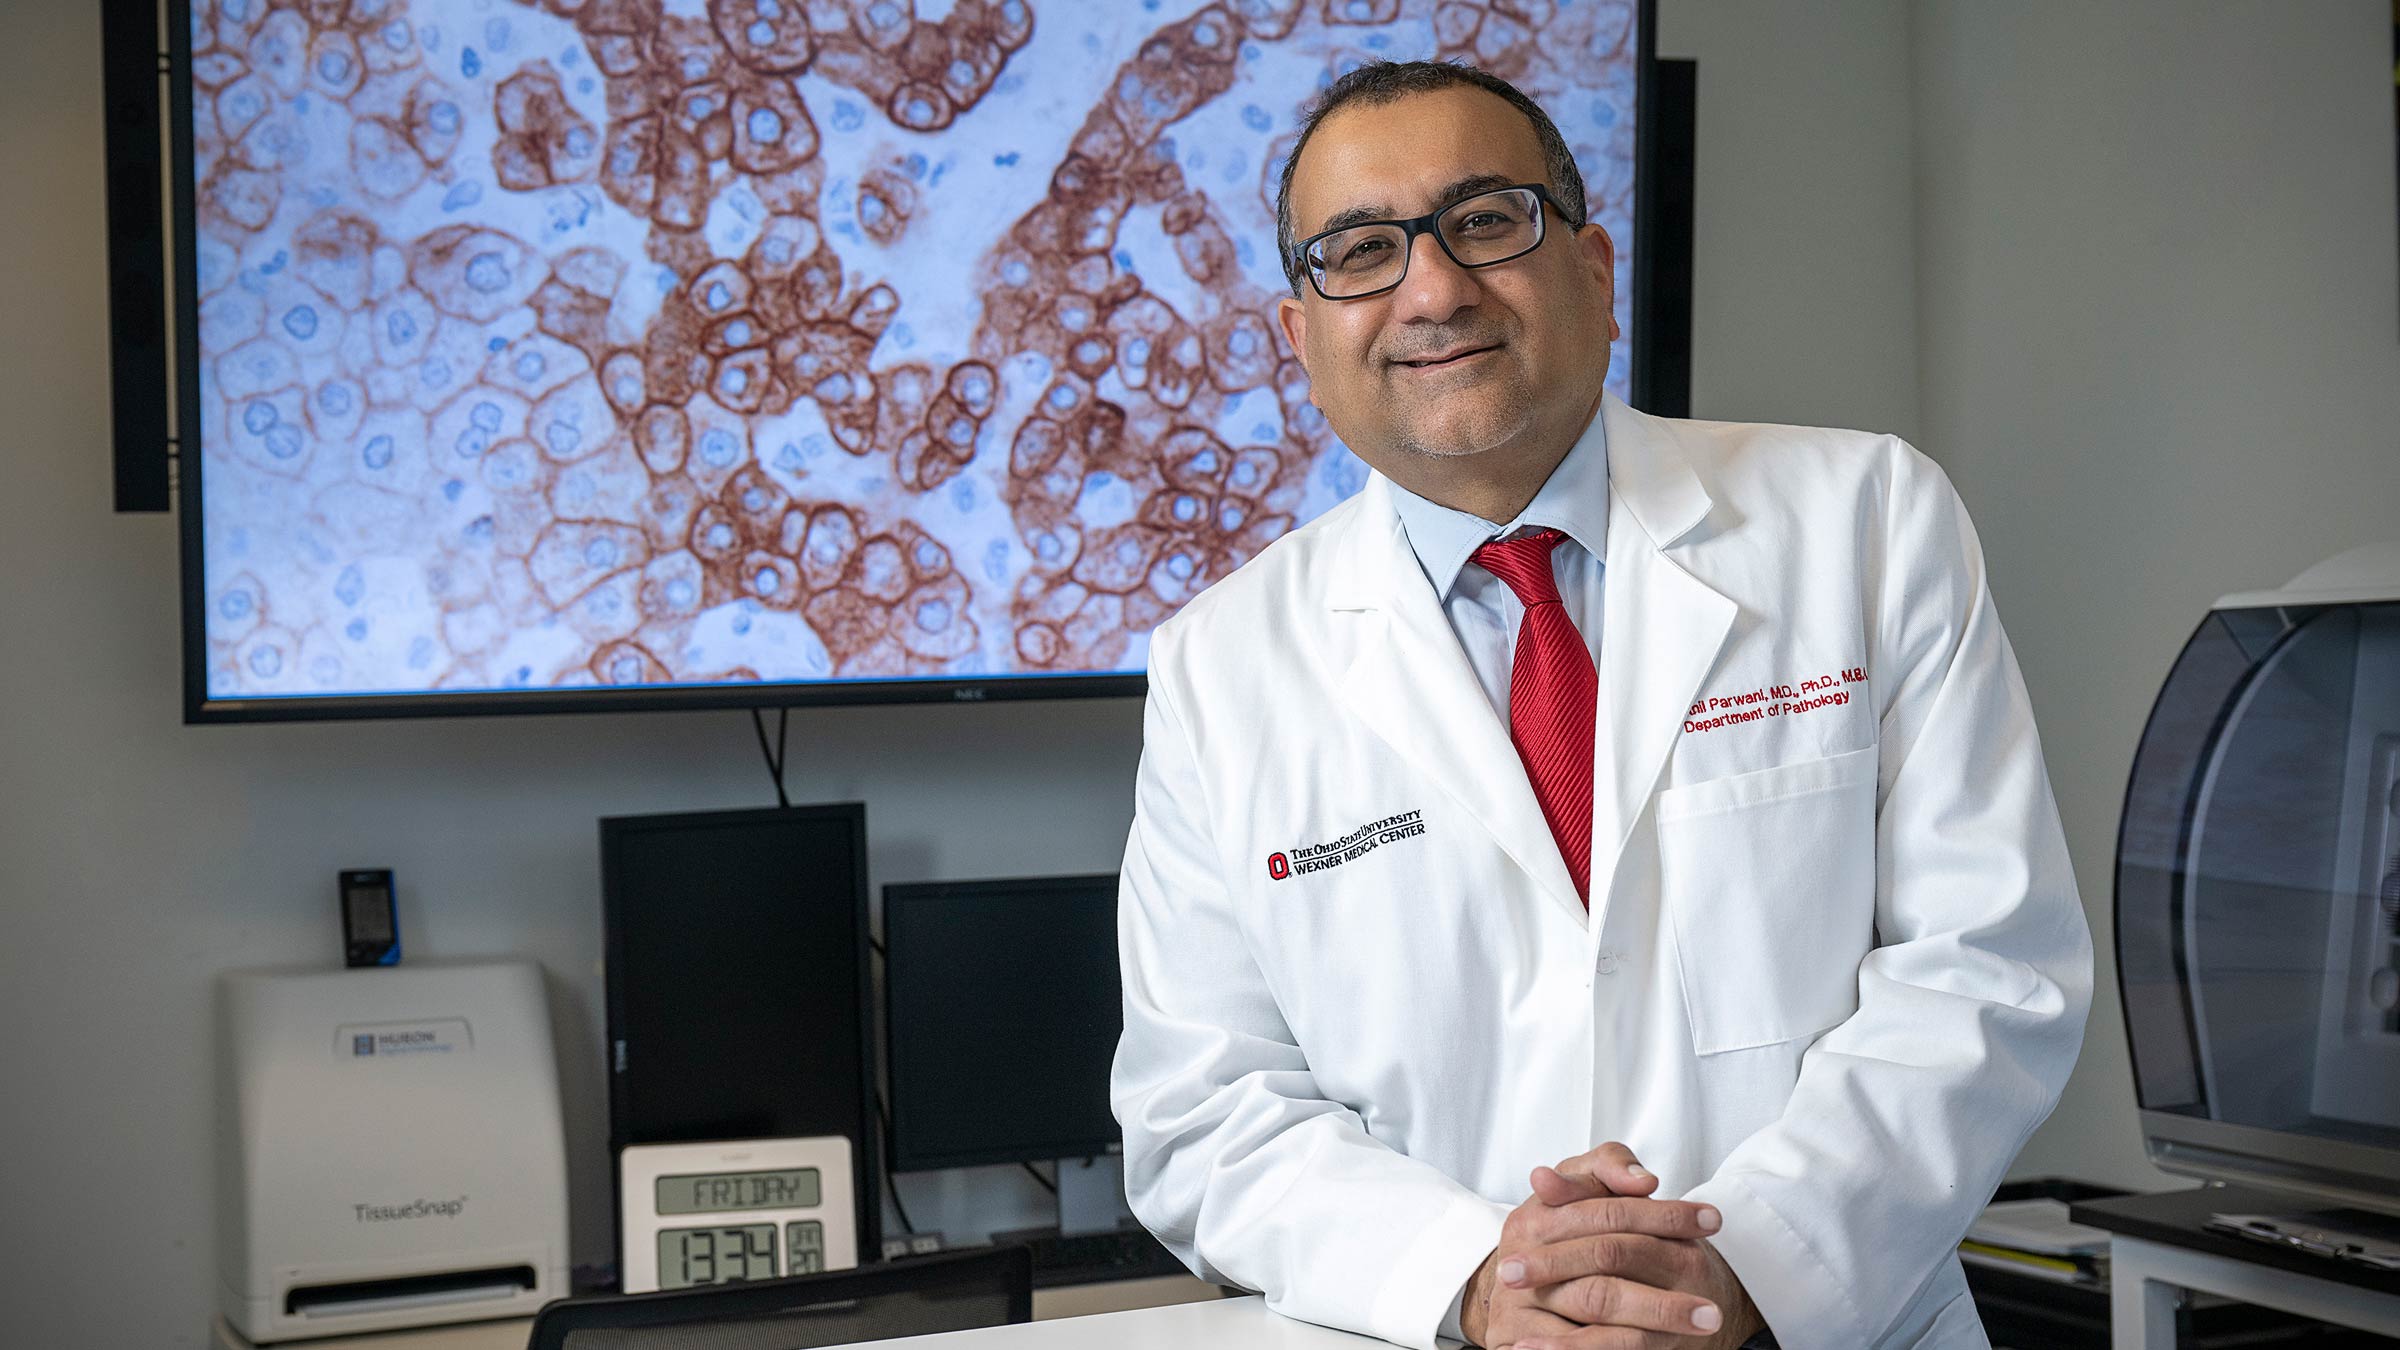 Dr. Anil Parwani standing in front of a screen with a microscopic view of cancer cells